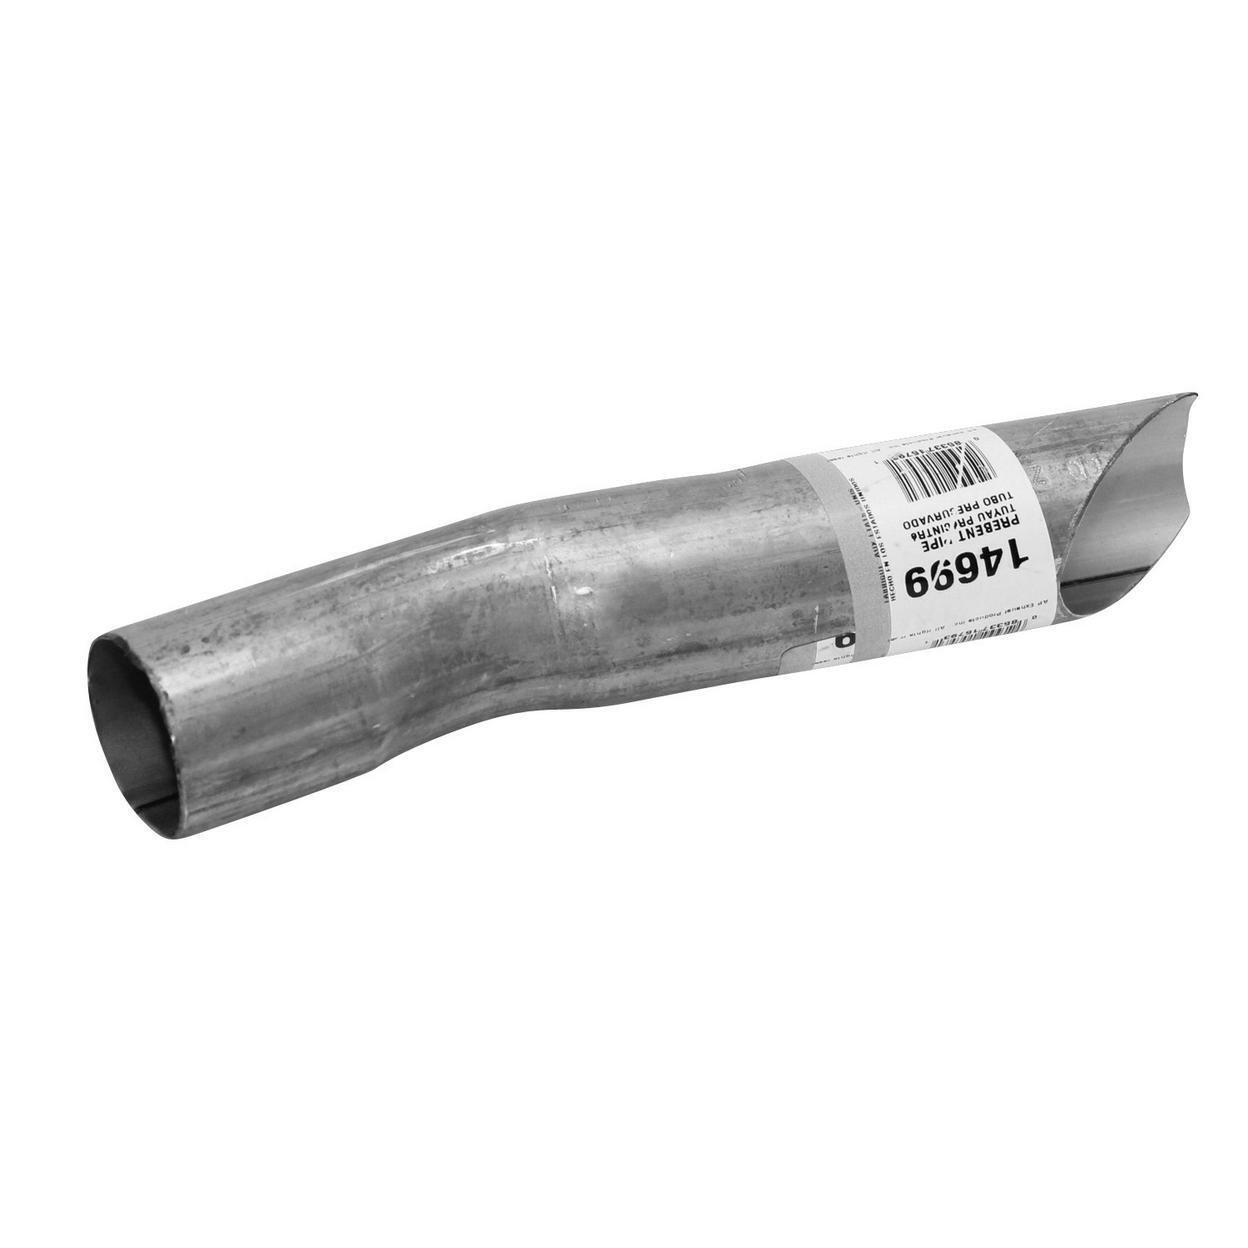 N/A Exhaust Tail Pipe Fits 1993-1996 Chevrolet Beretta 2.2L L4 GAS OHV